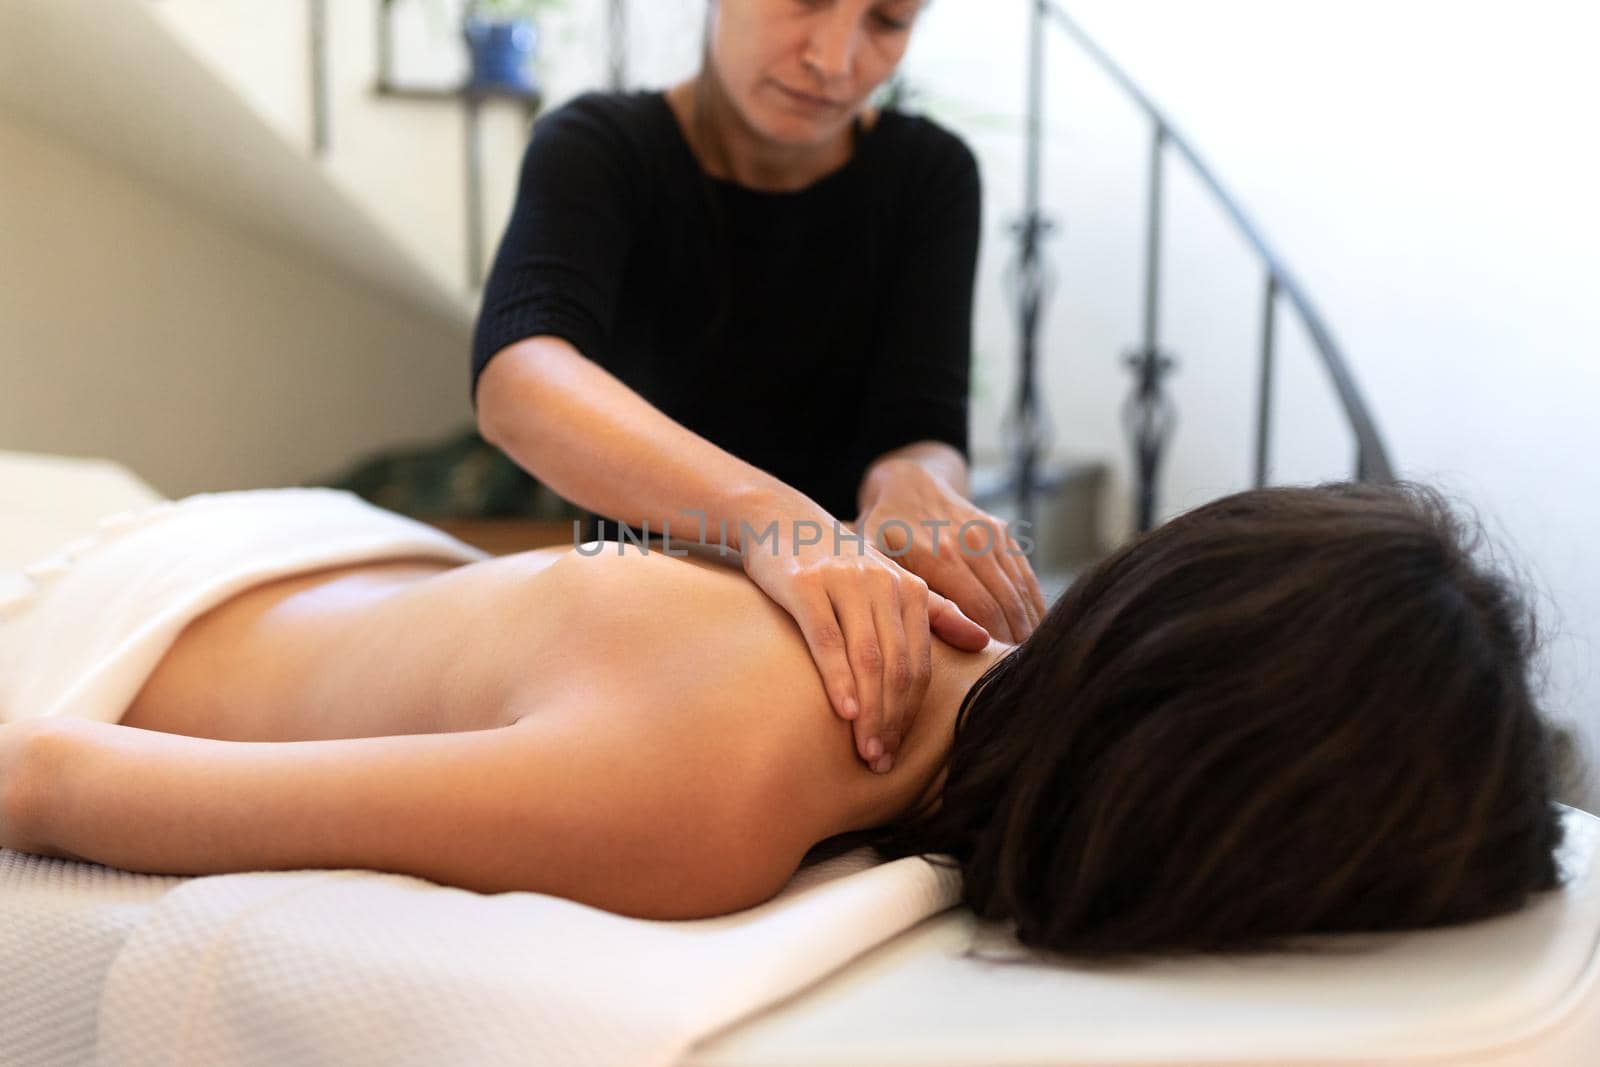 Young caucasian woman receiving therapeutic back massage. Bodycare and wellness concept.